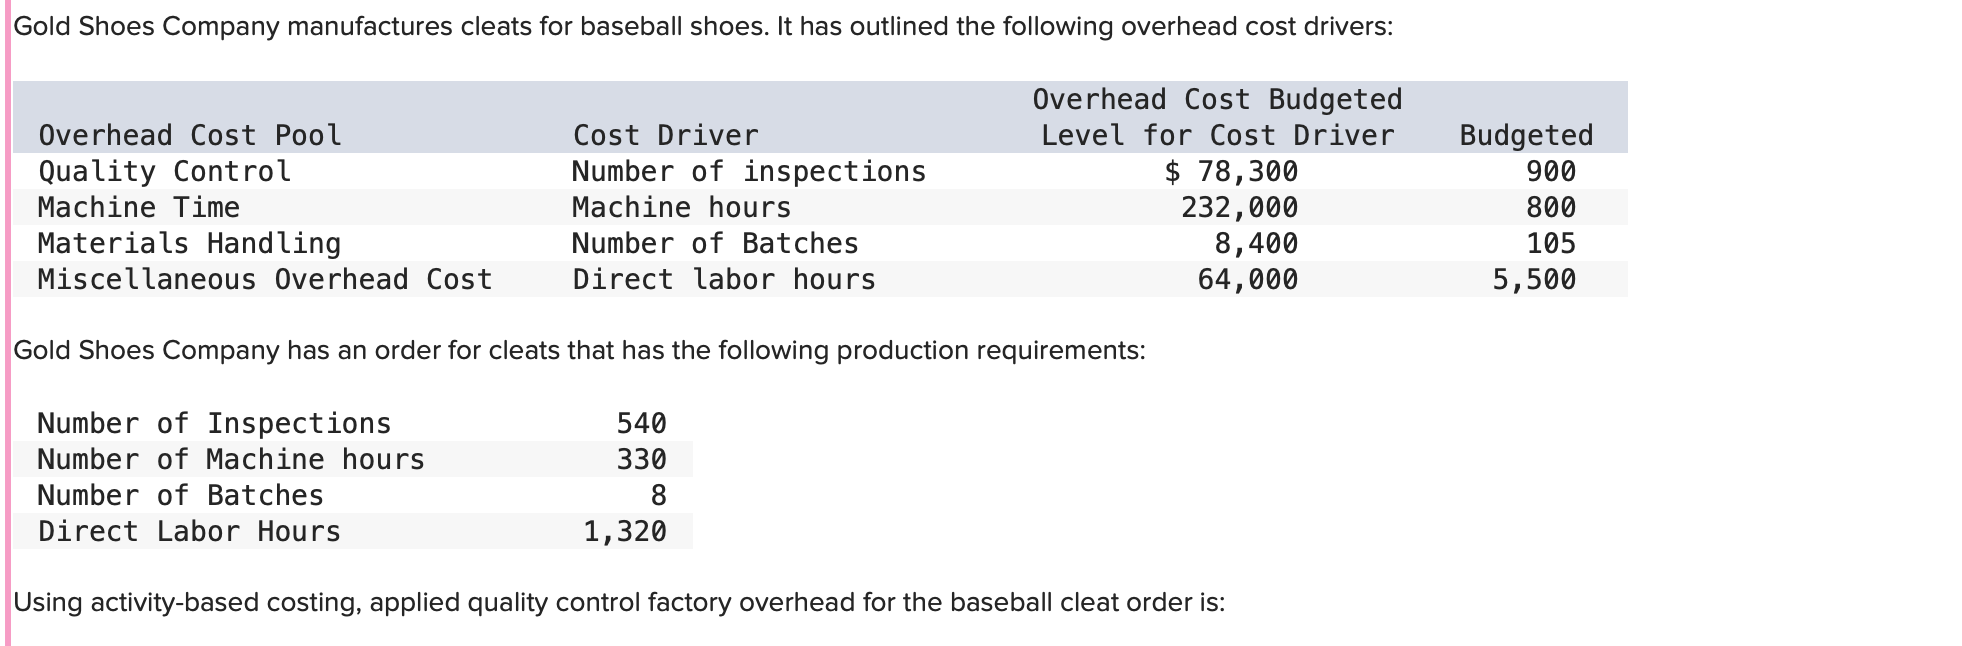 Gold Shoes Company manufactures cleats for baseball shoes. It has outlined the following overhead cost